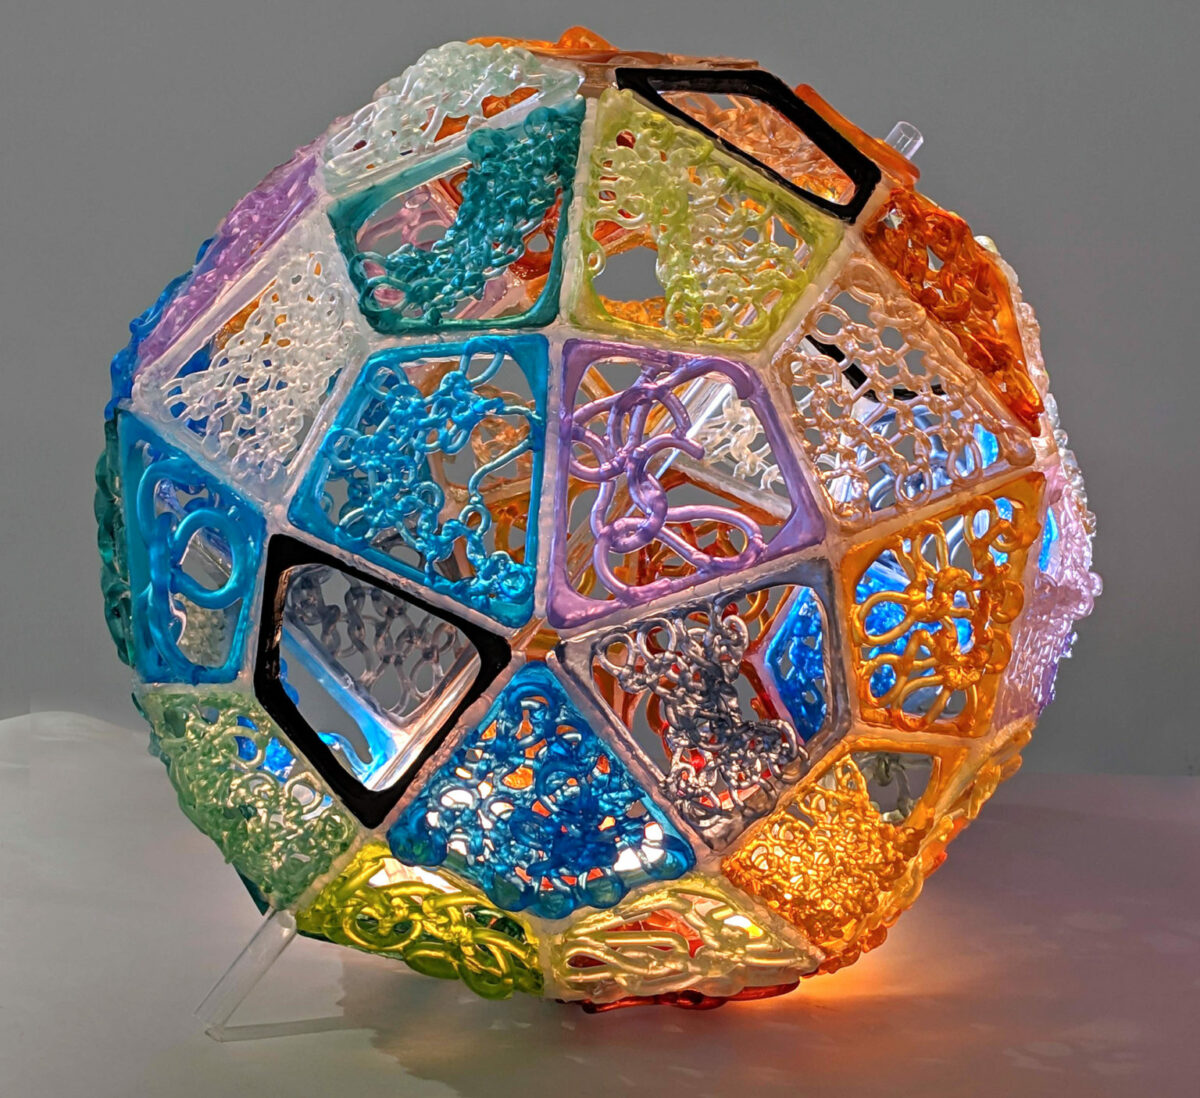 Knitted Glass, Fiber Inspired Sculptures By Carol Milne (20)